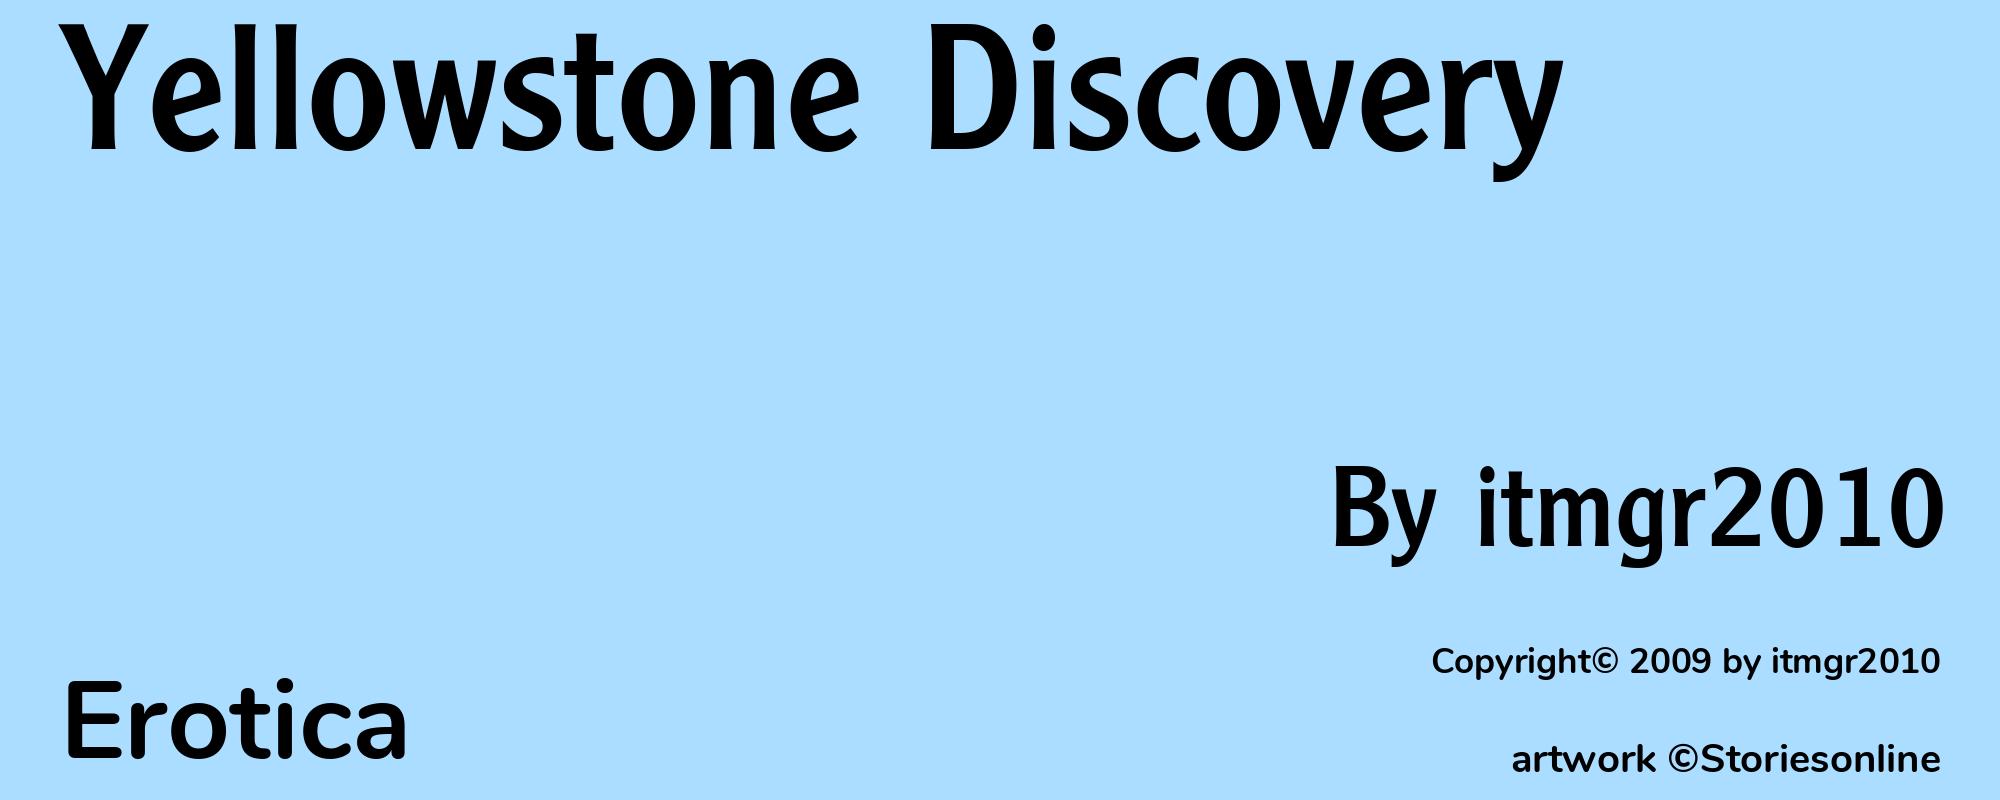 Yellowstone Discovery - Cover